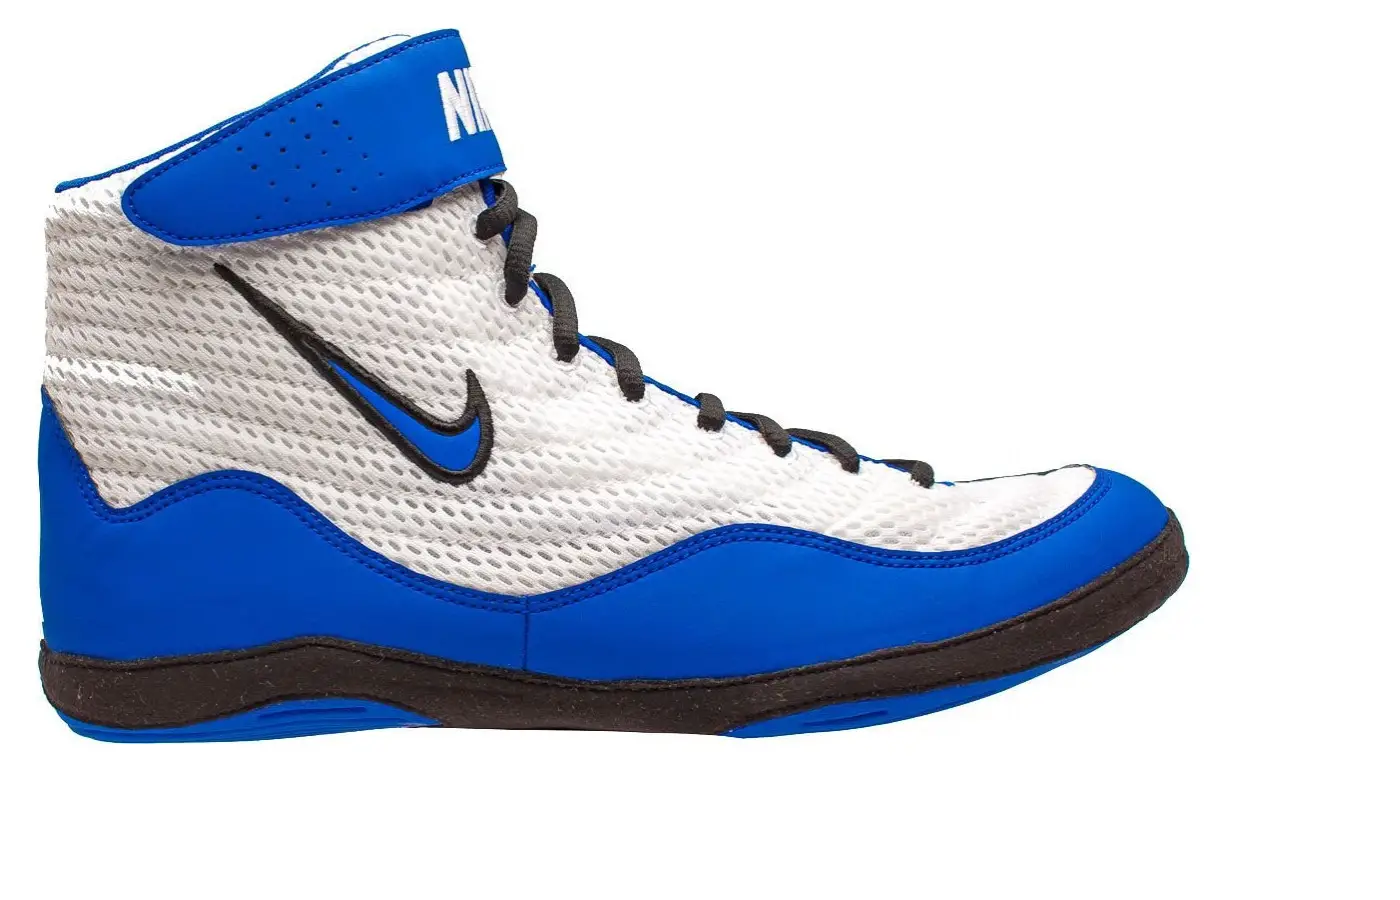 Nike Inflict 3 blue and white